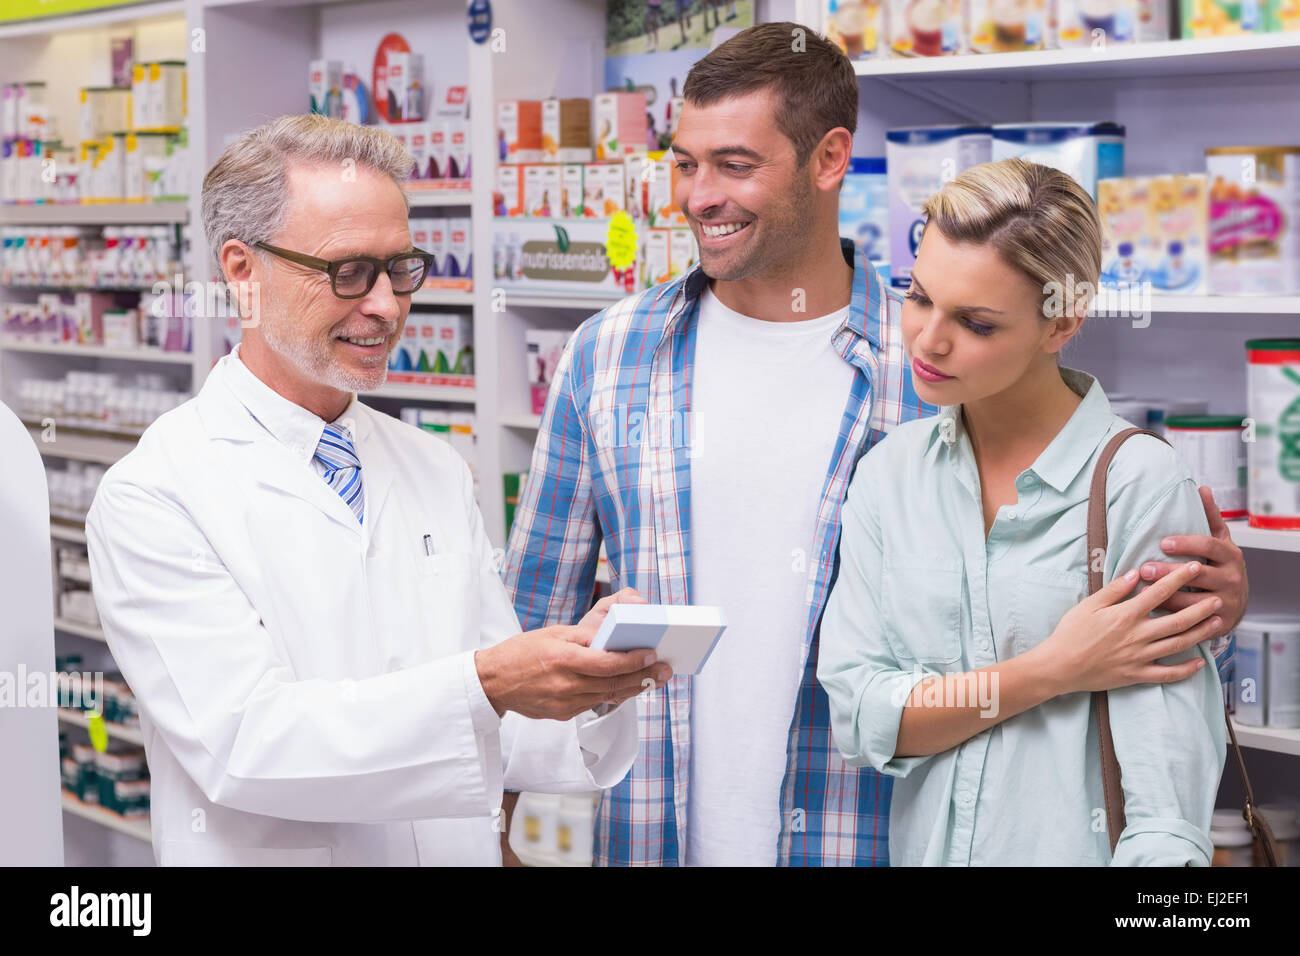 Pharmacist and costumers smiling Stock Photo